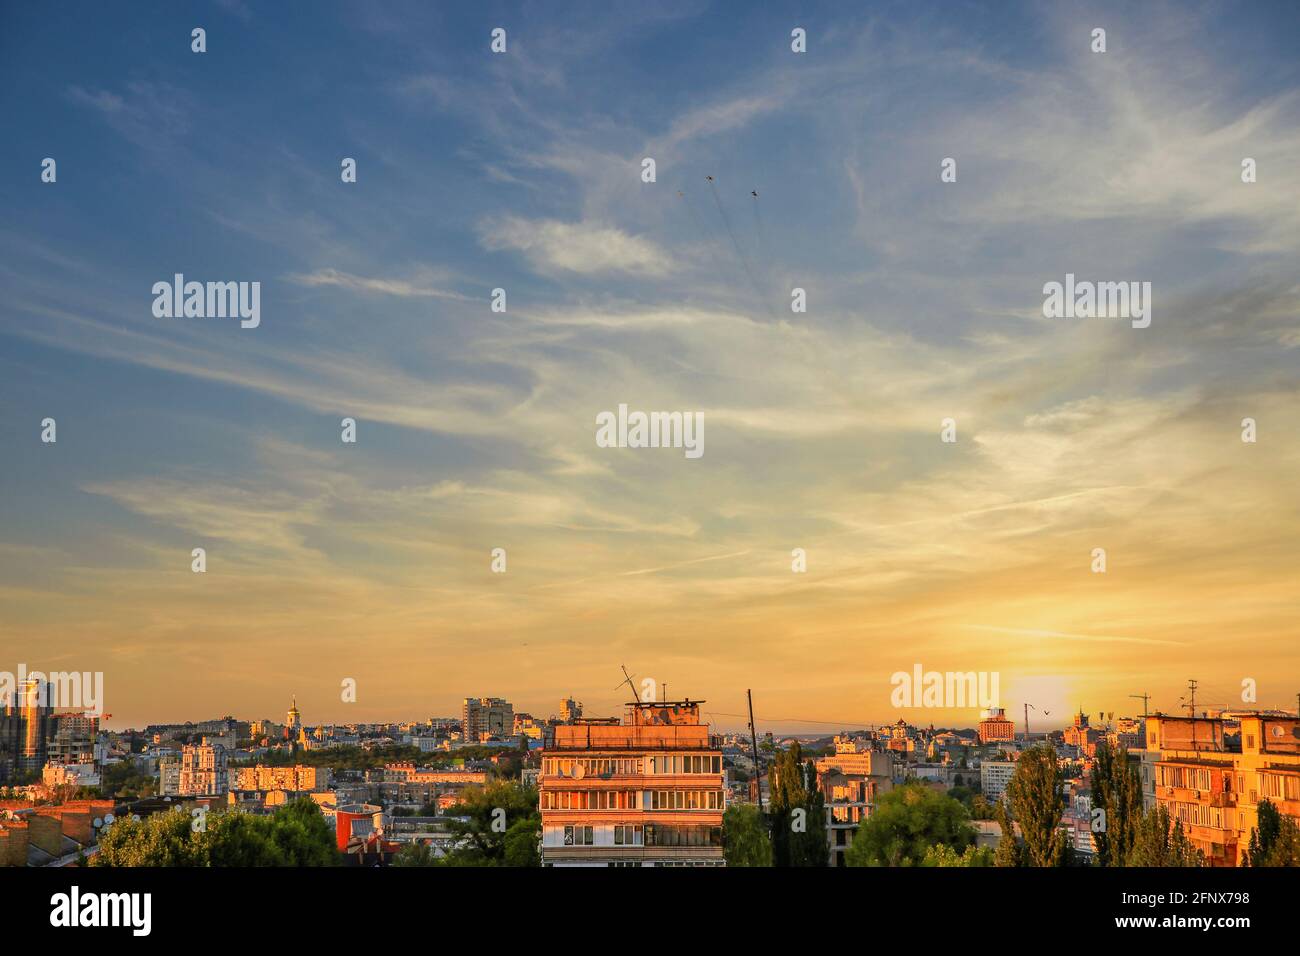 Cityscape with military fighters in the dramatic sunset sky in Kyiv, Ukraine Stock Photo